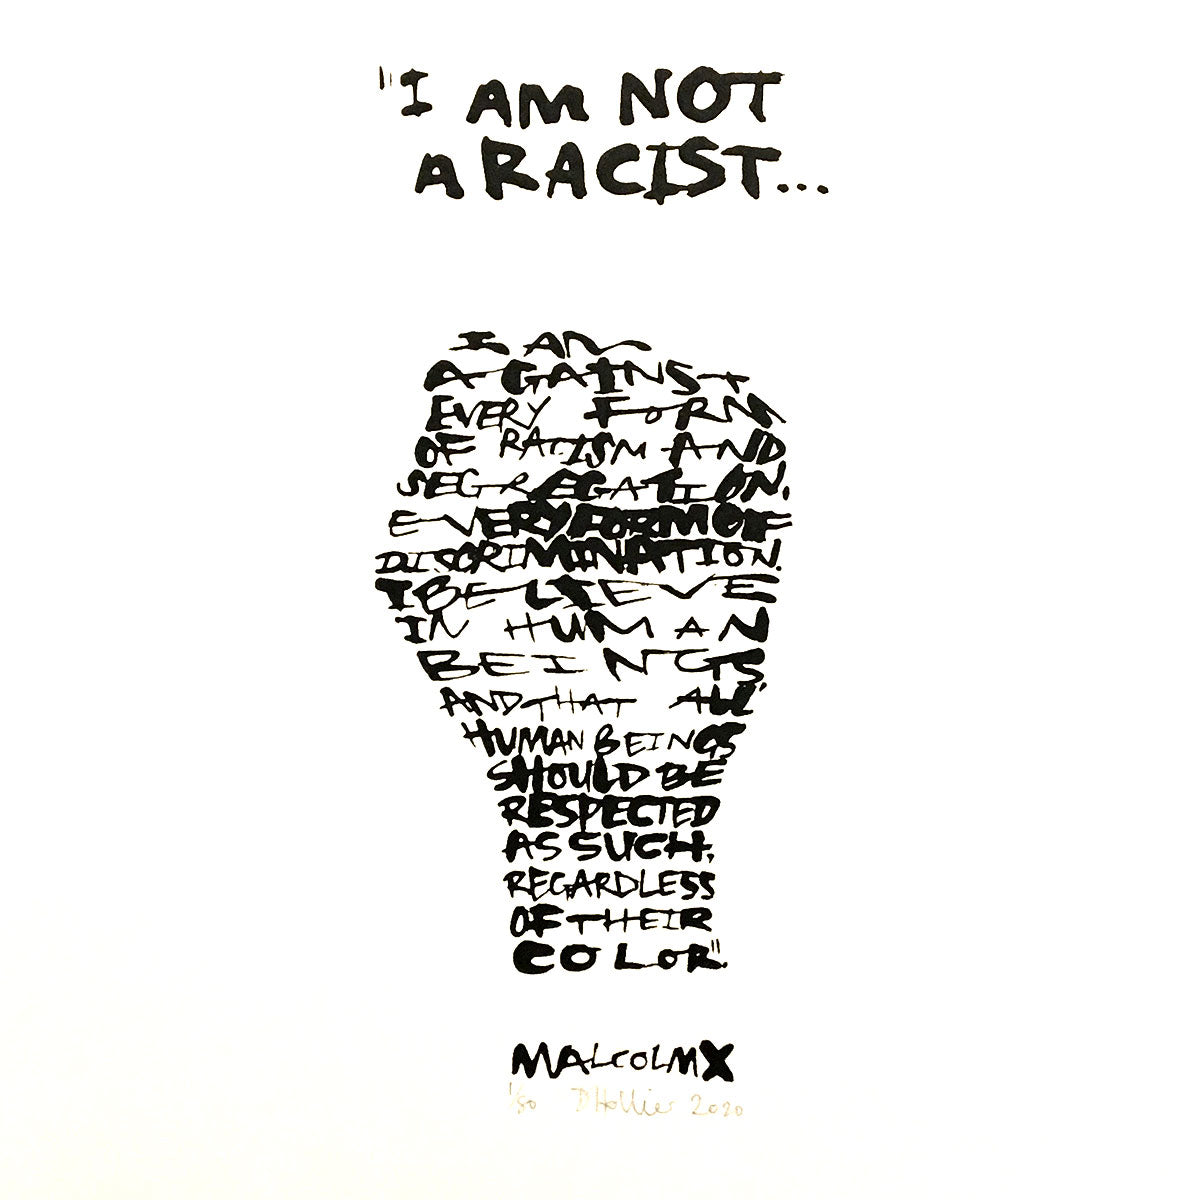 "I am not a Racist..." - Malcolm X